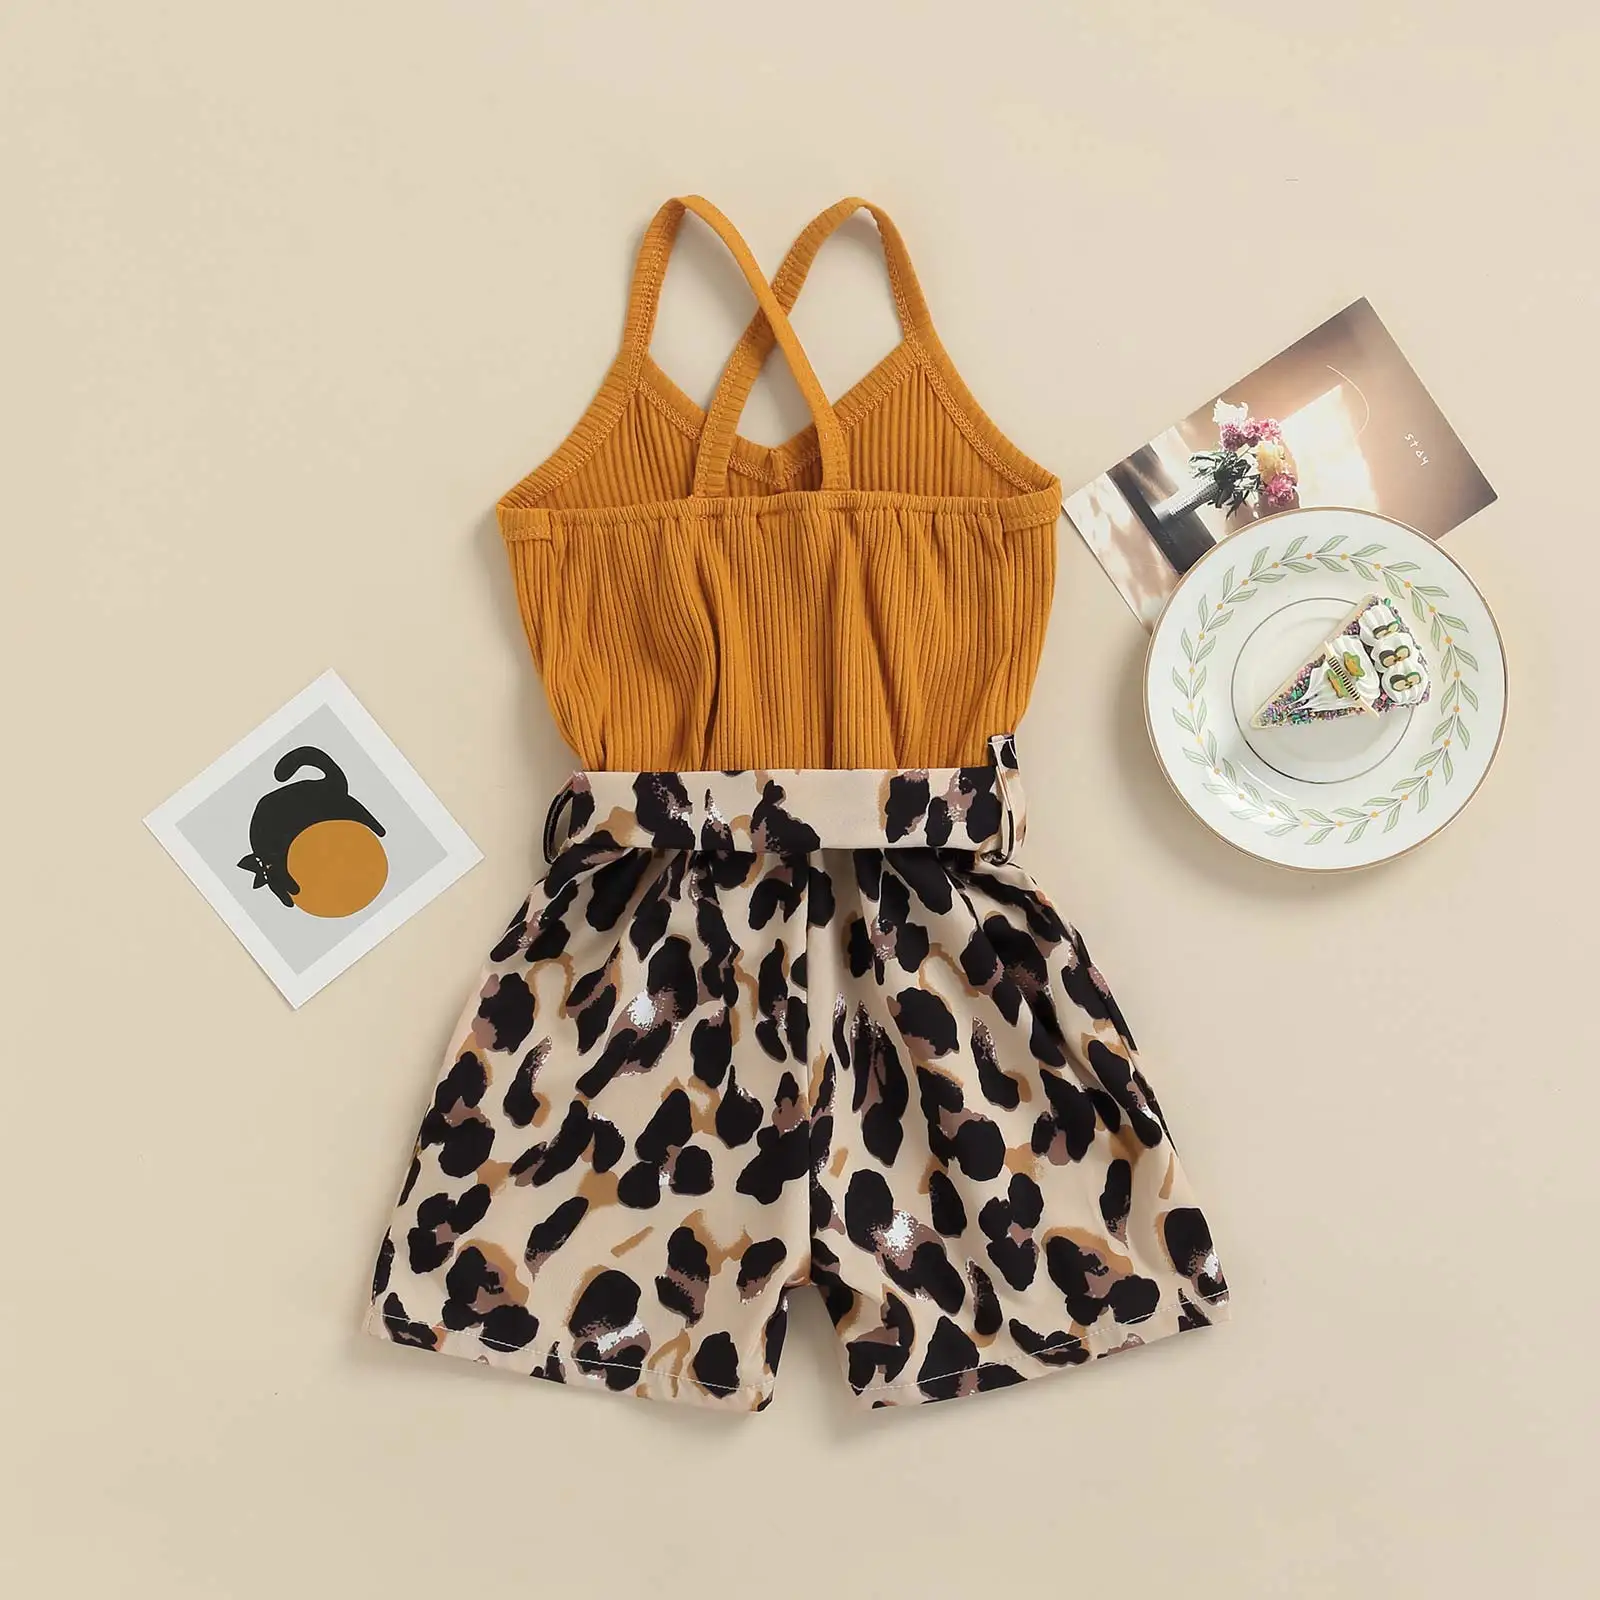 Baby Bodysuits Fur Lioraitiin 1-6Years Toddler Baby Girl Summer Romper Sleeveless Solid Patchwork Leopard Jumpsuit 4Colors bright baby bodysuits	